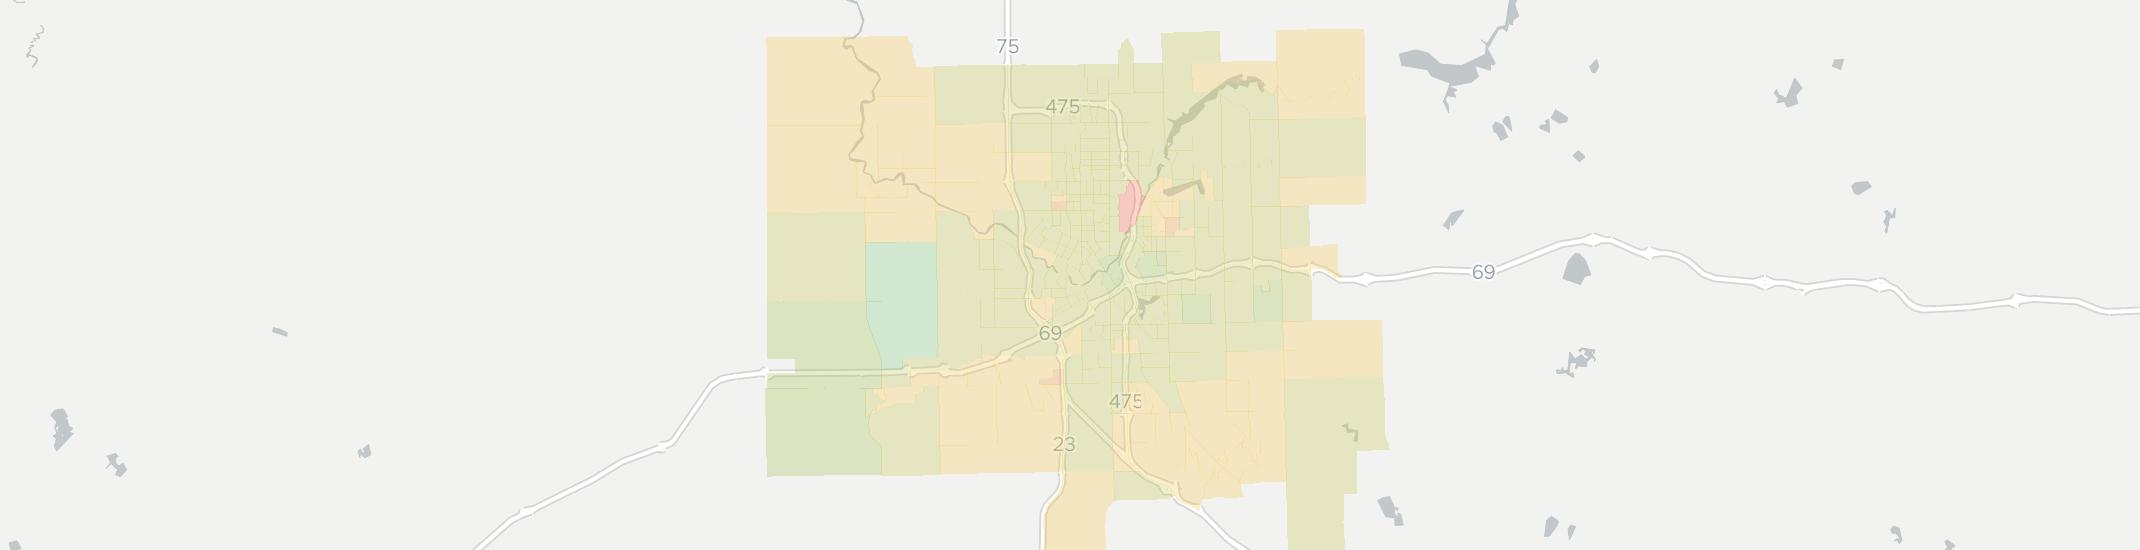 Flint Internet Competition Map. Click for interactive map.